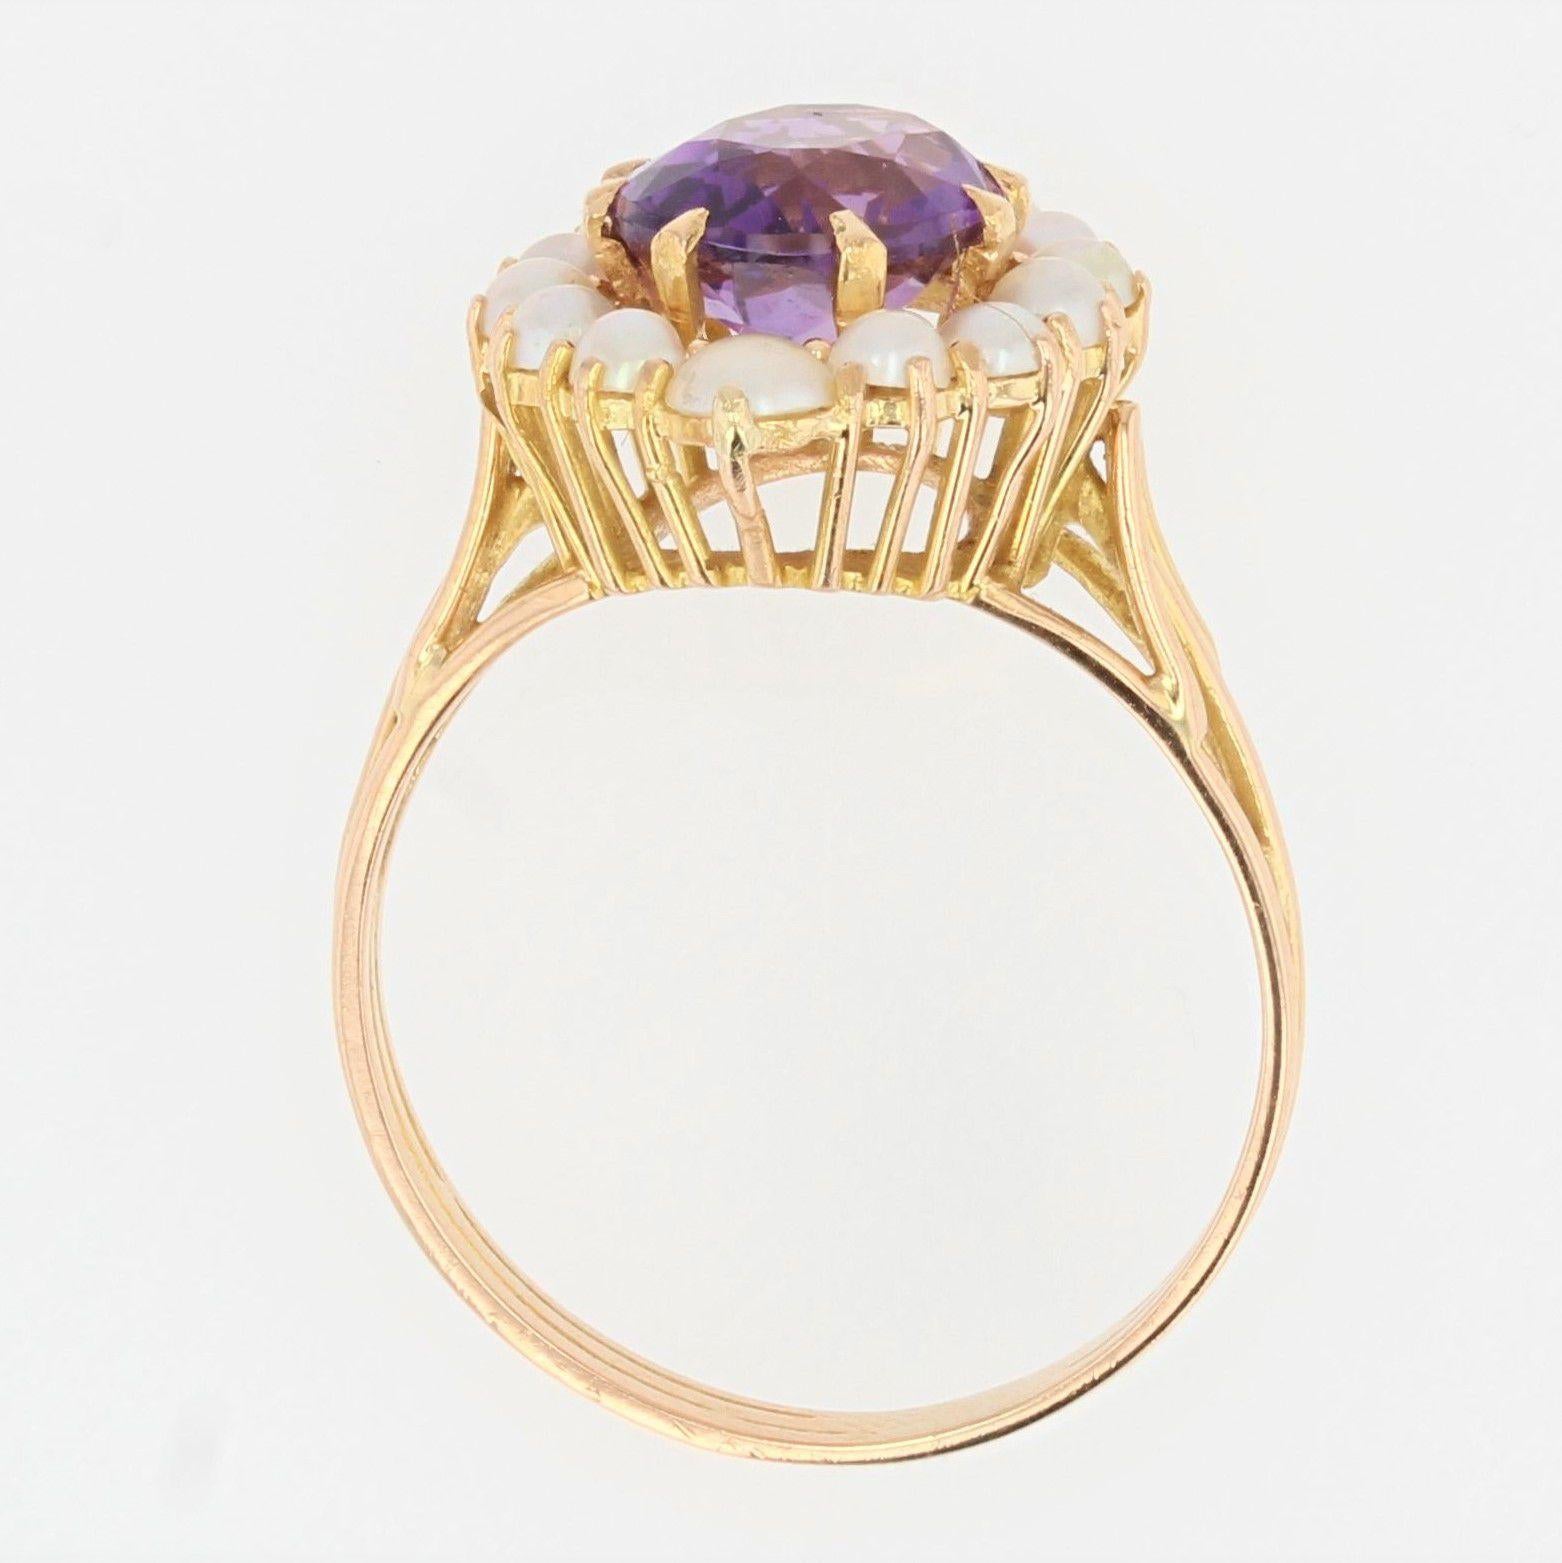 French 1960s Amethyst Cultured Pearls 18 Karat Yellow Gold Ring For Sale 4